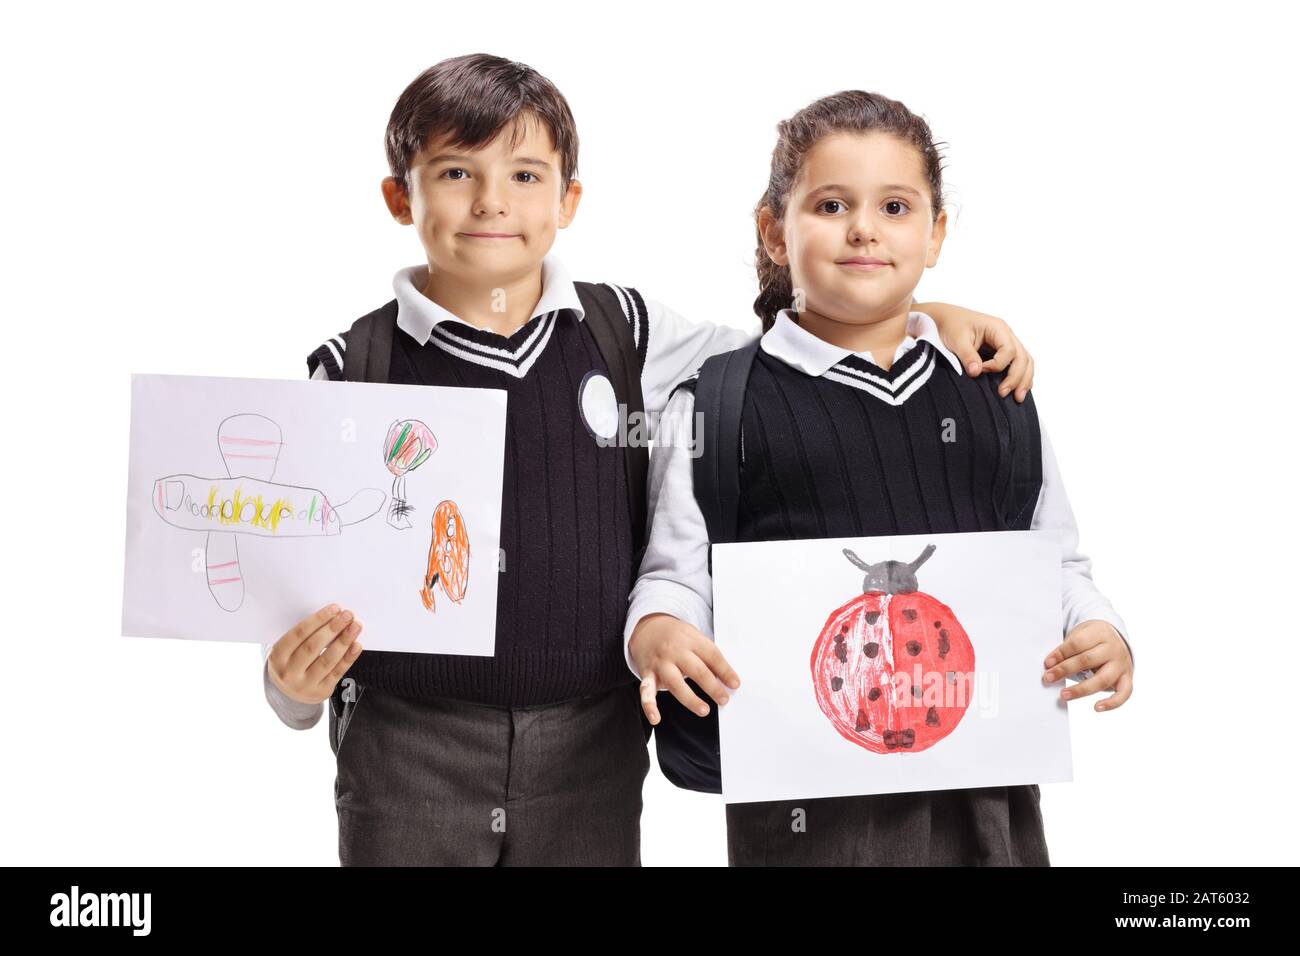 Schoolchildren holding drawings isolated on white background Stock Photo